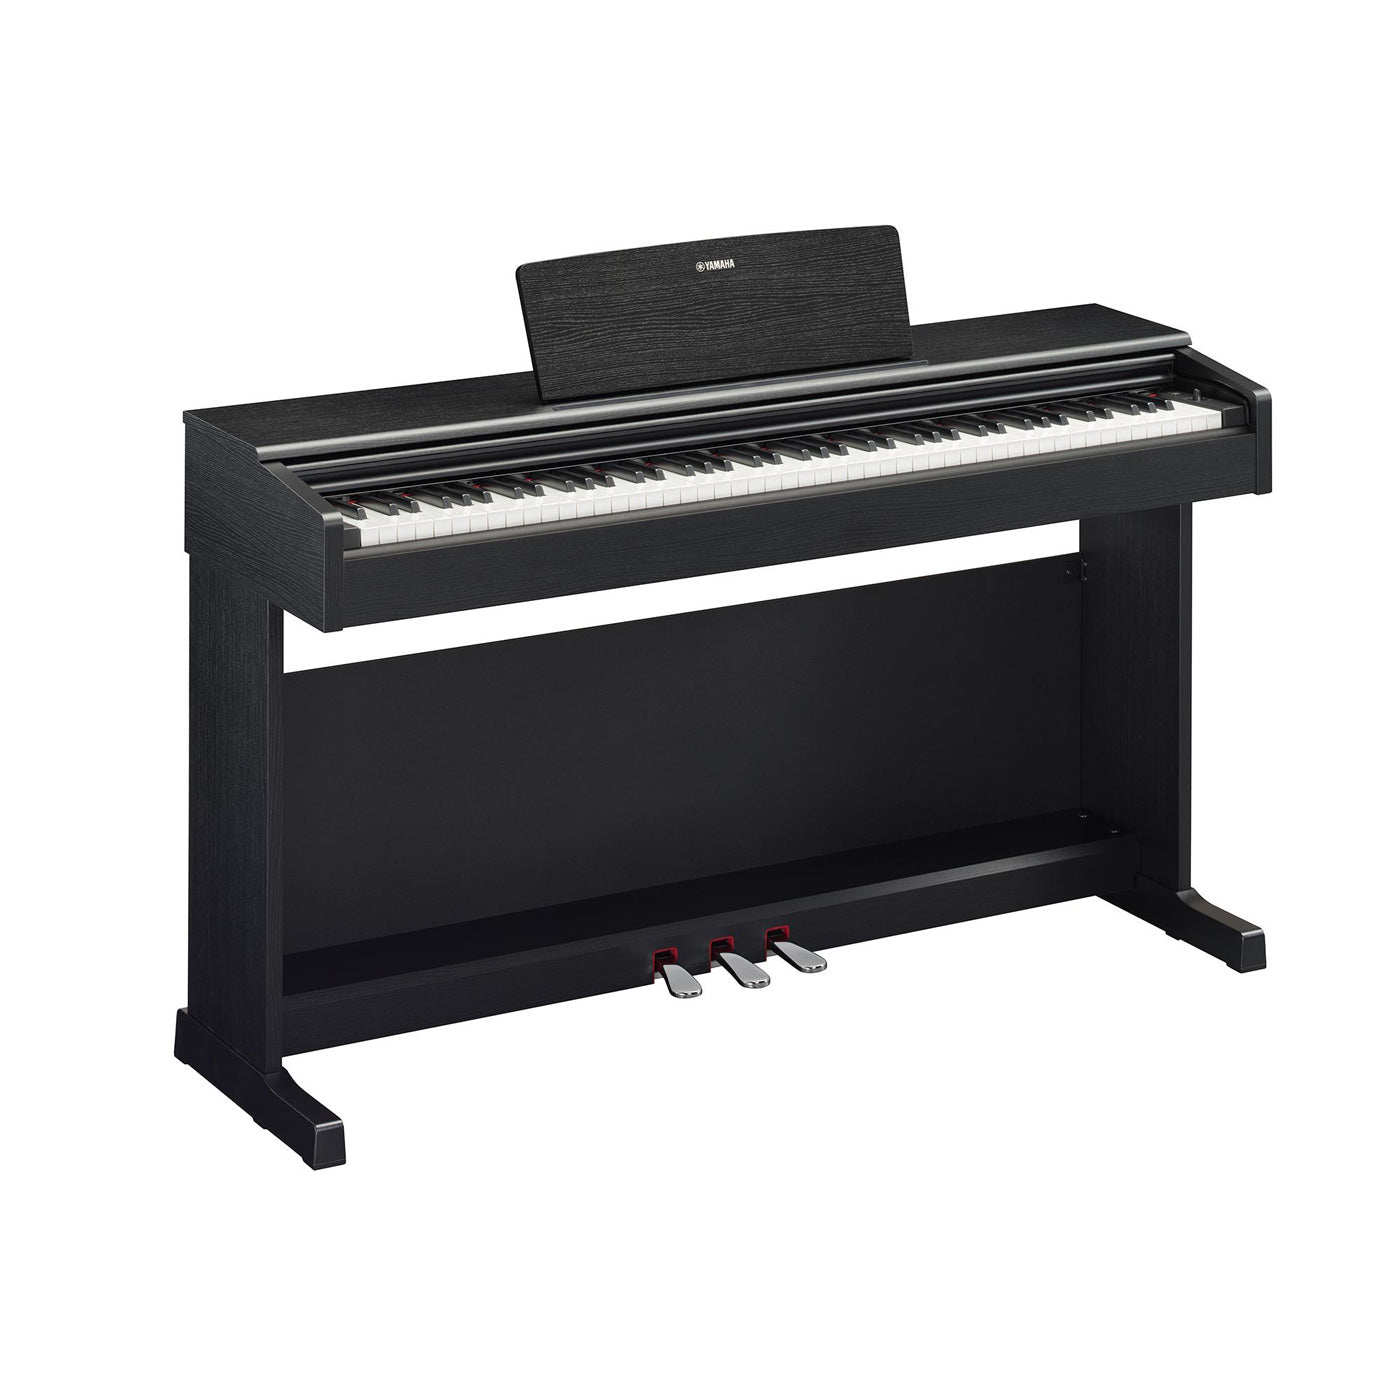 Yamaha YDP-145 ARIUS Standard Digital Piano with Bench and 3 Pedal Unit - Black